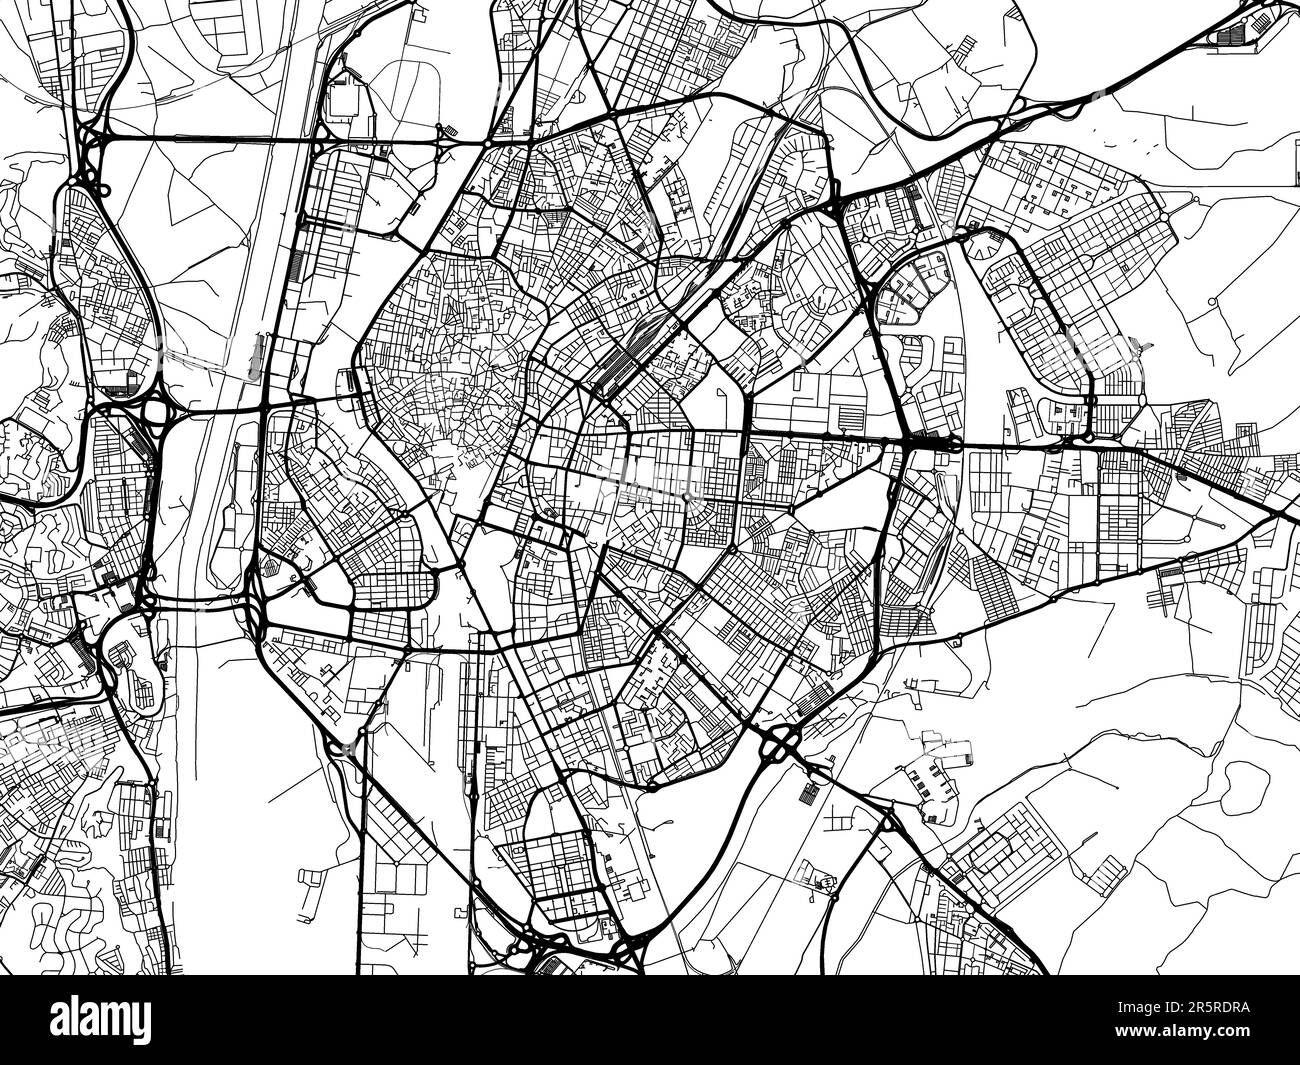 Vector road map of the city of  Seville in Spain on a white background. Stock Photo